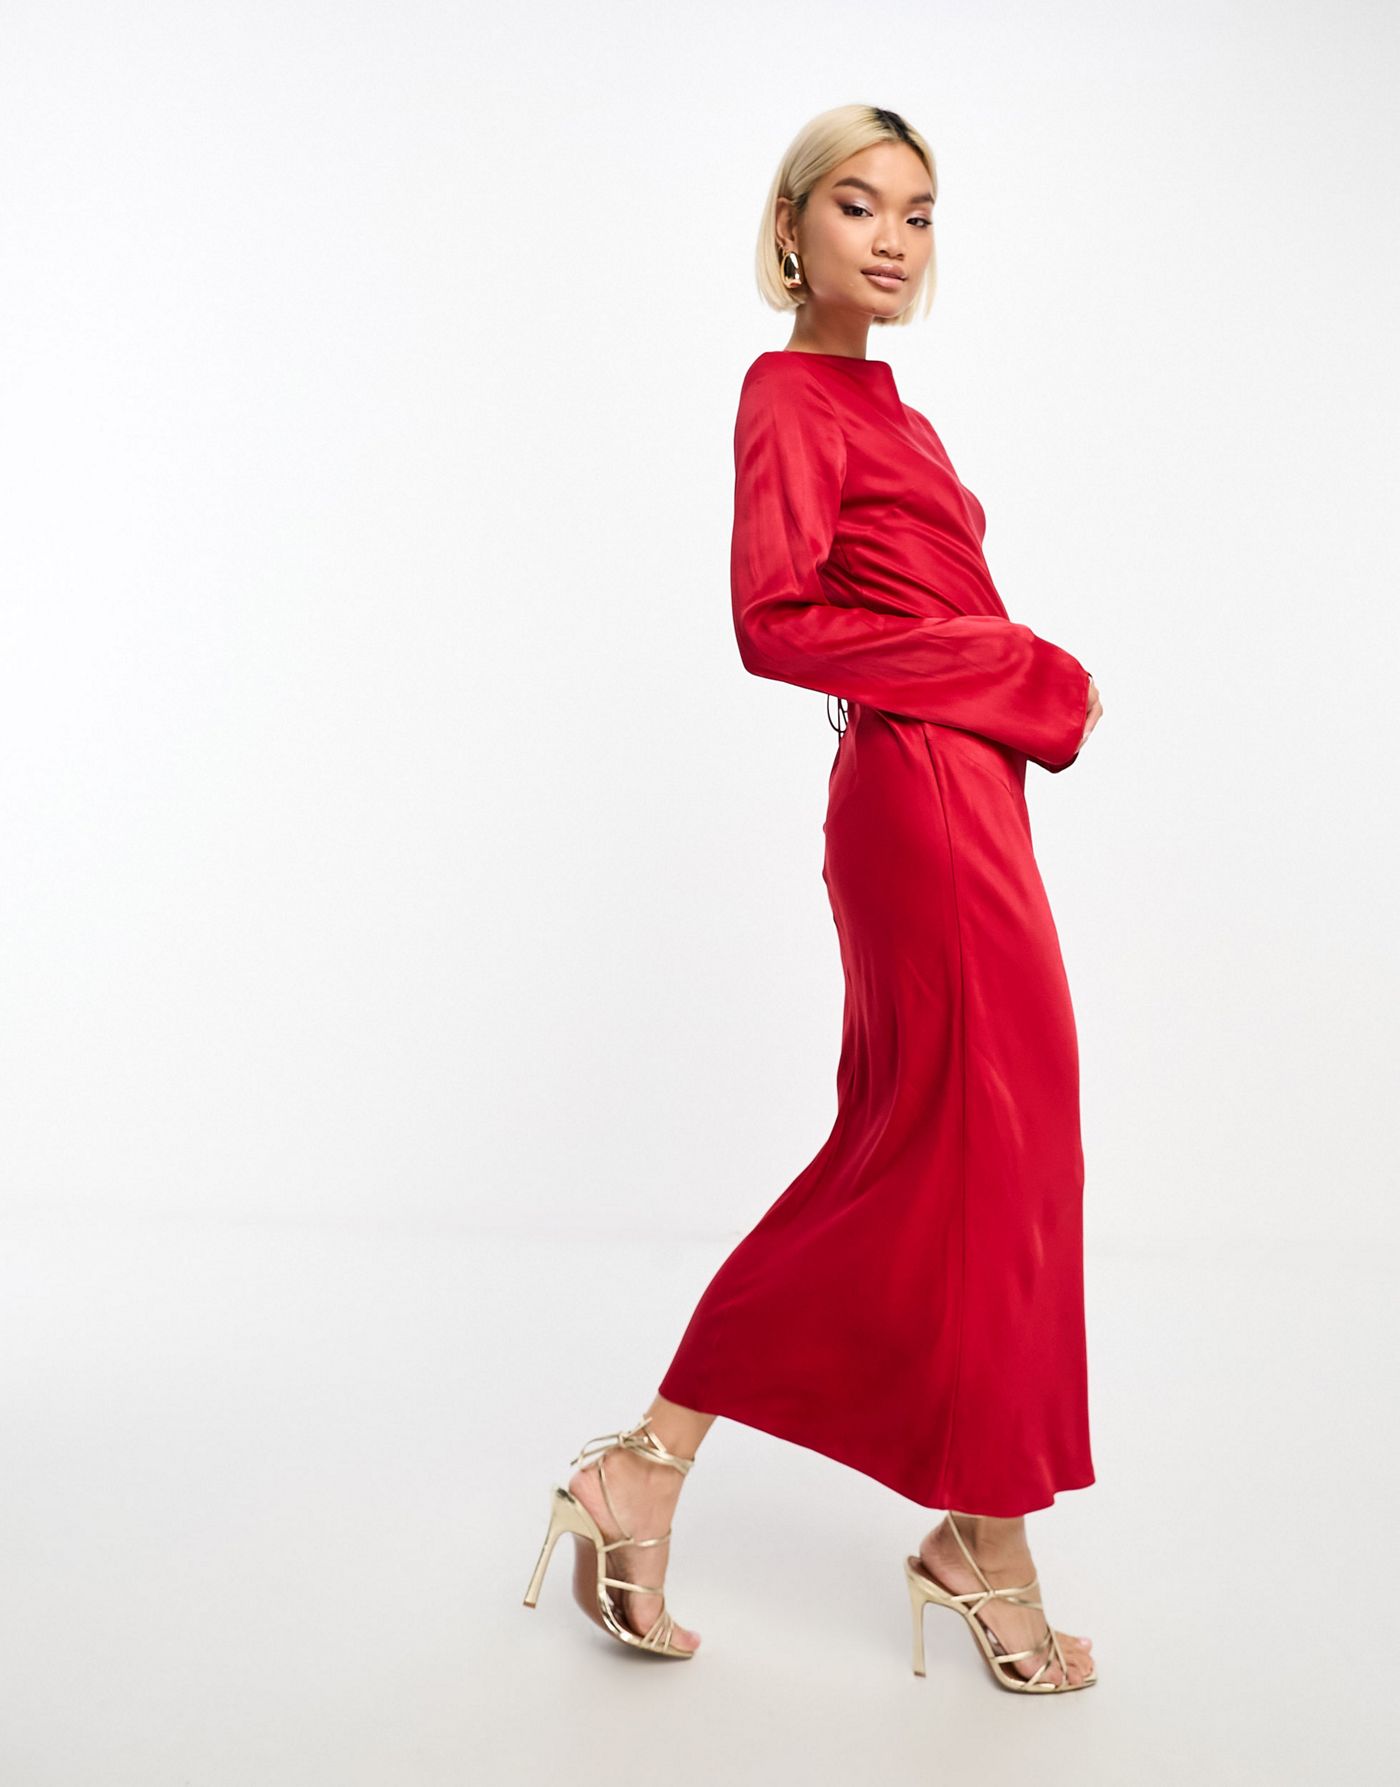 & Other Stories satin lace-up open back midi dress in red